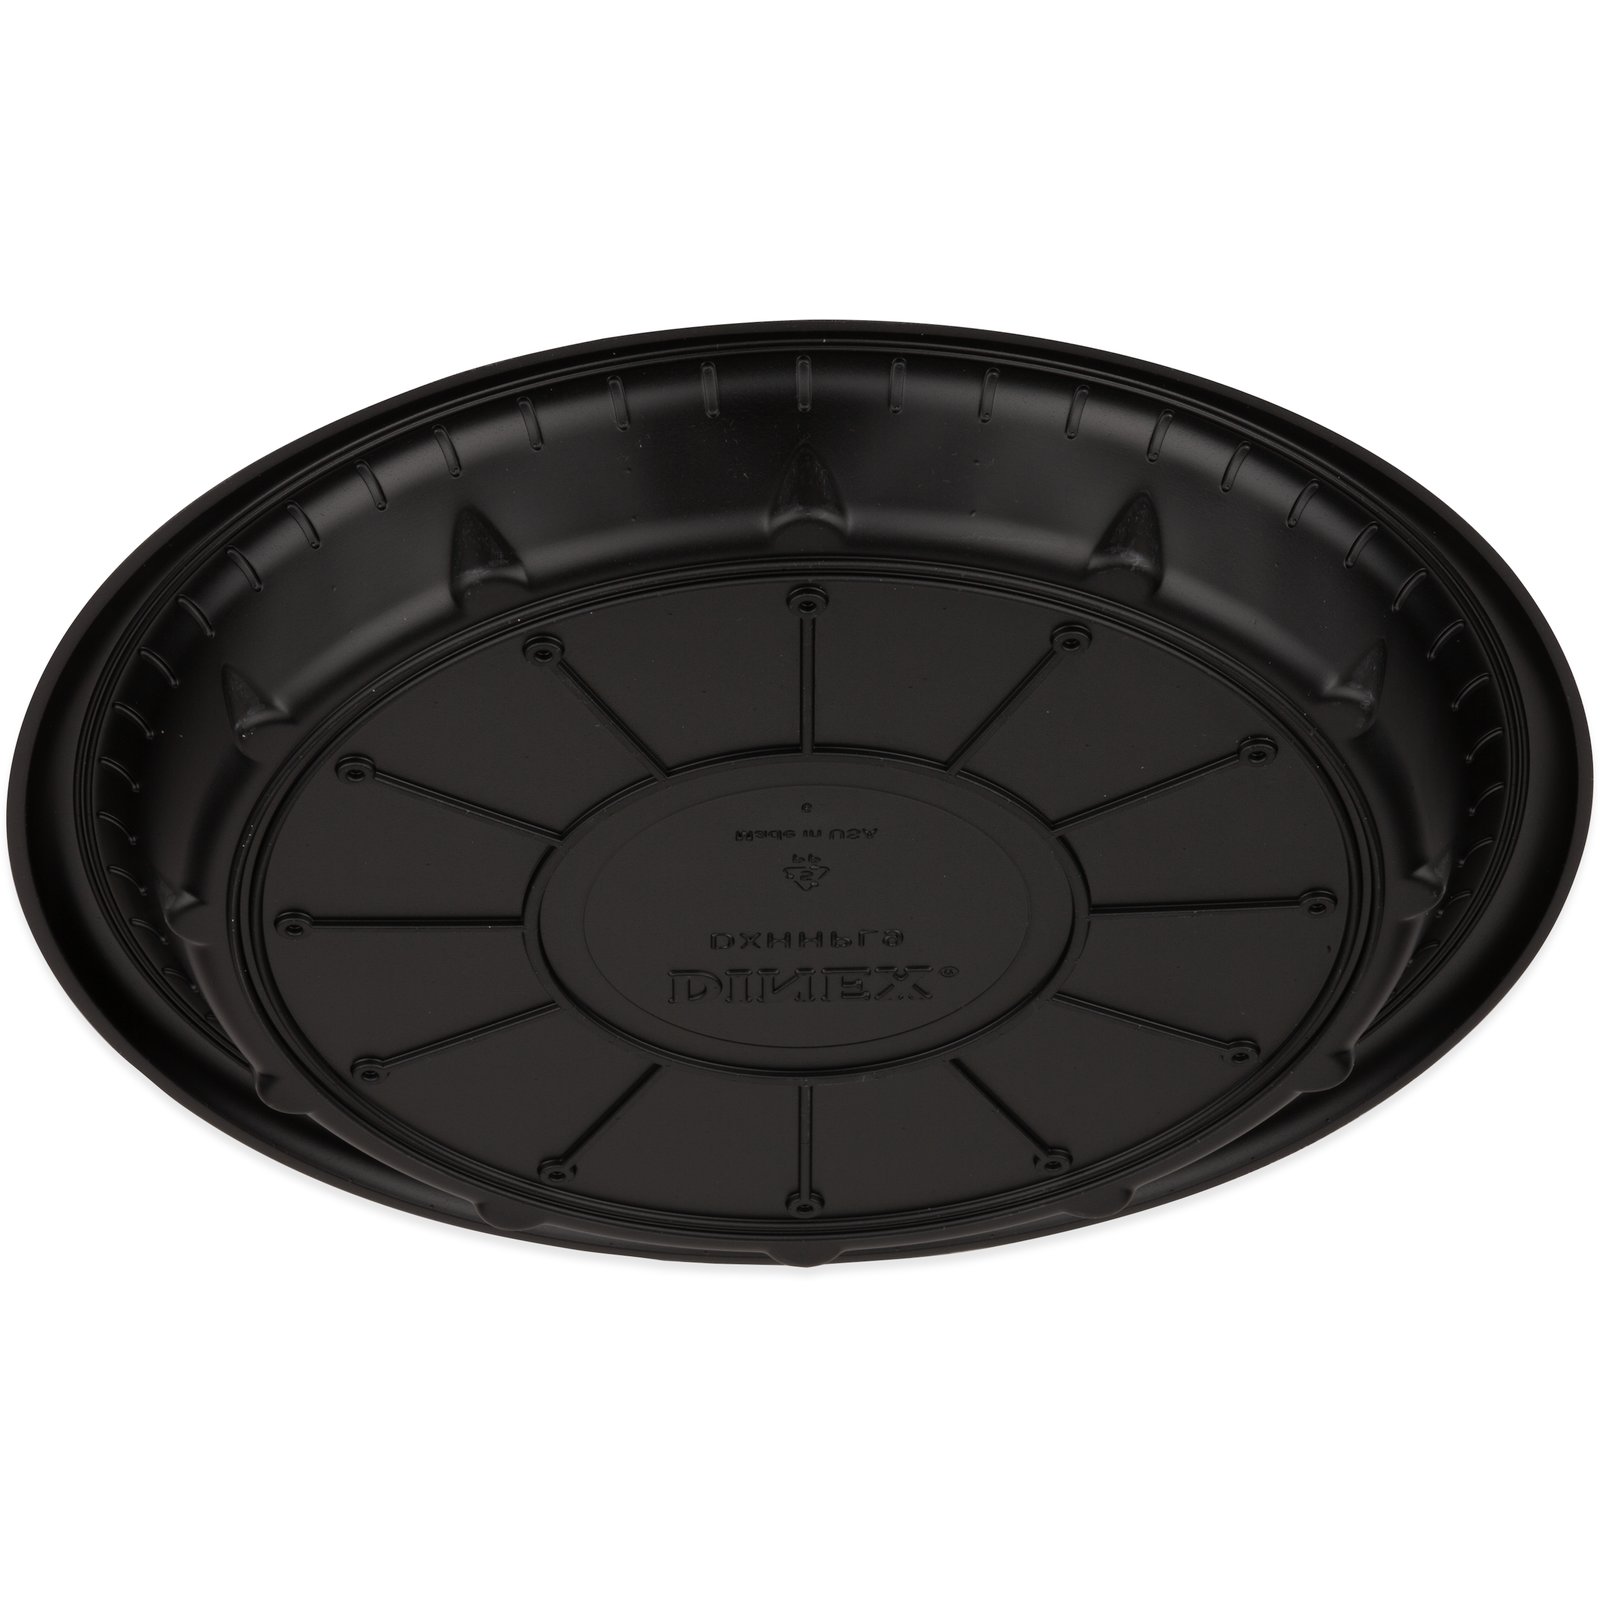 High Heat Disposable Dishware  Carlisle FoodService Products